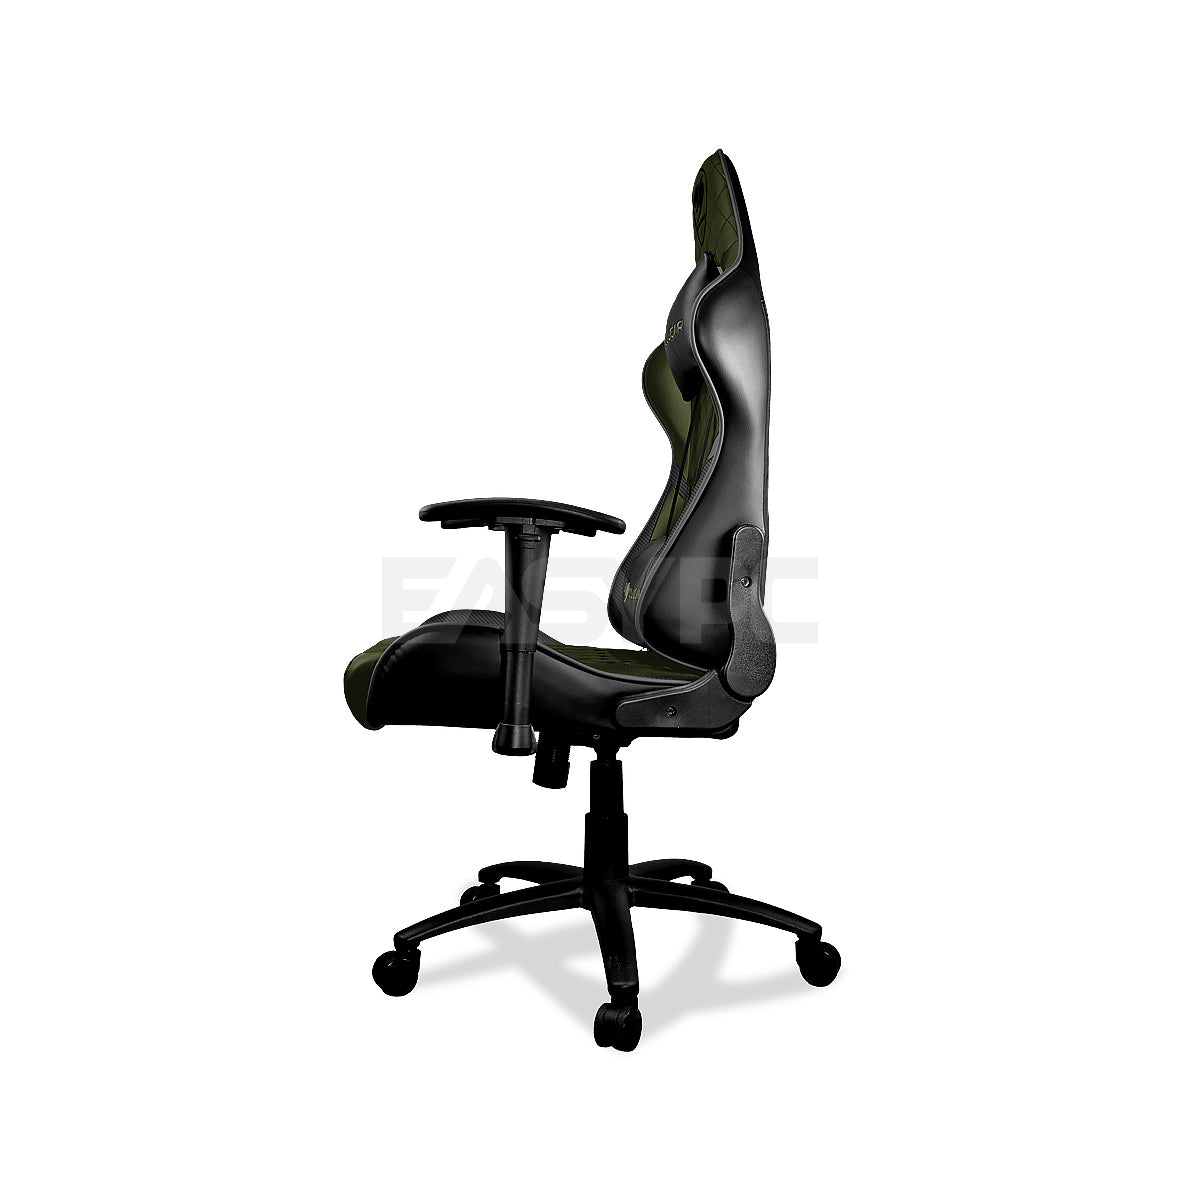 Cougar Armor One Gaming Chair Black Army Green-c